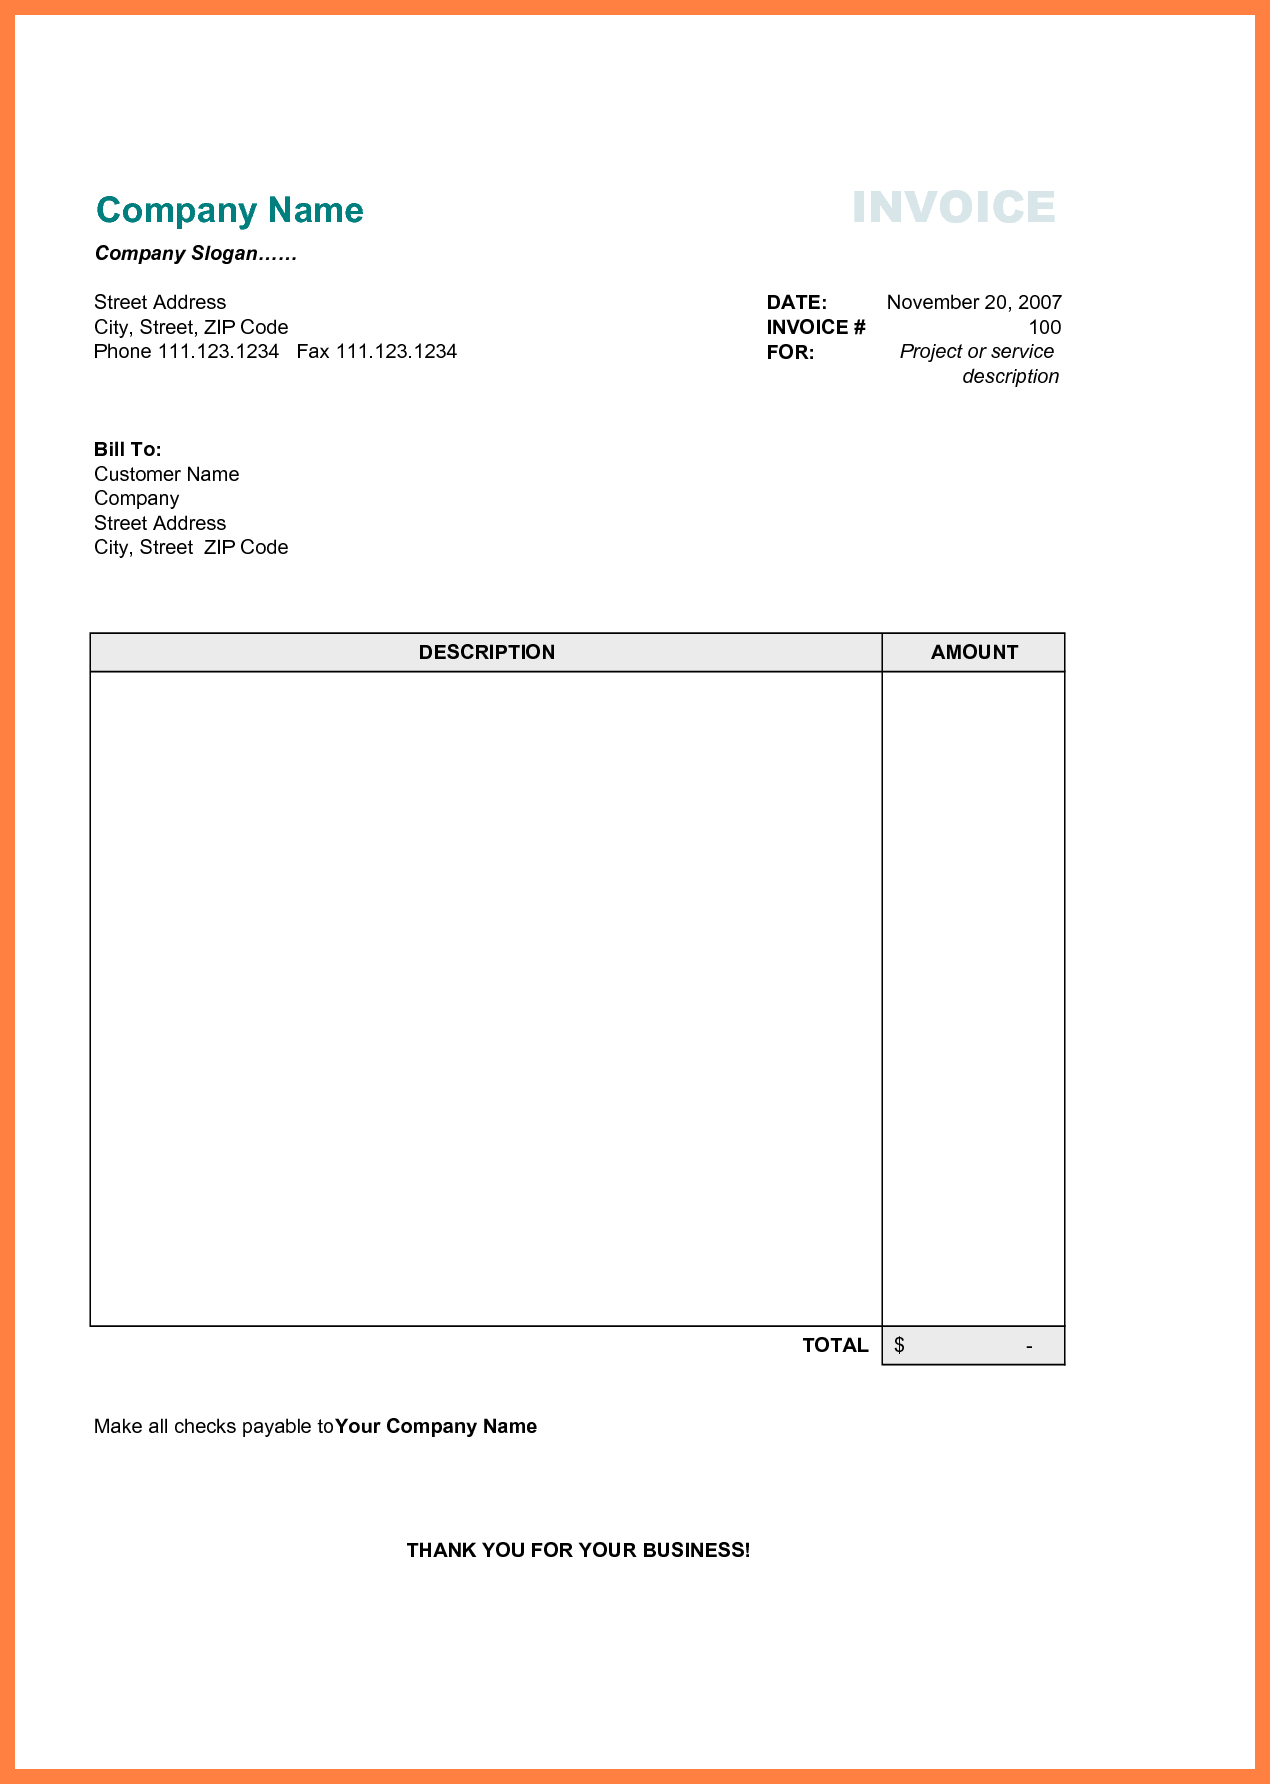 Free Printable Business Invoice Template - Invoice Format In Excel - Free Printable Invoices